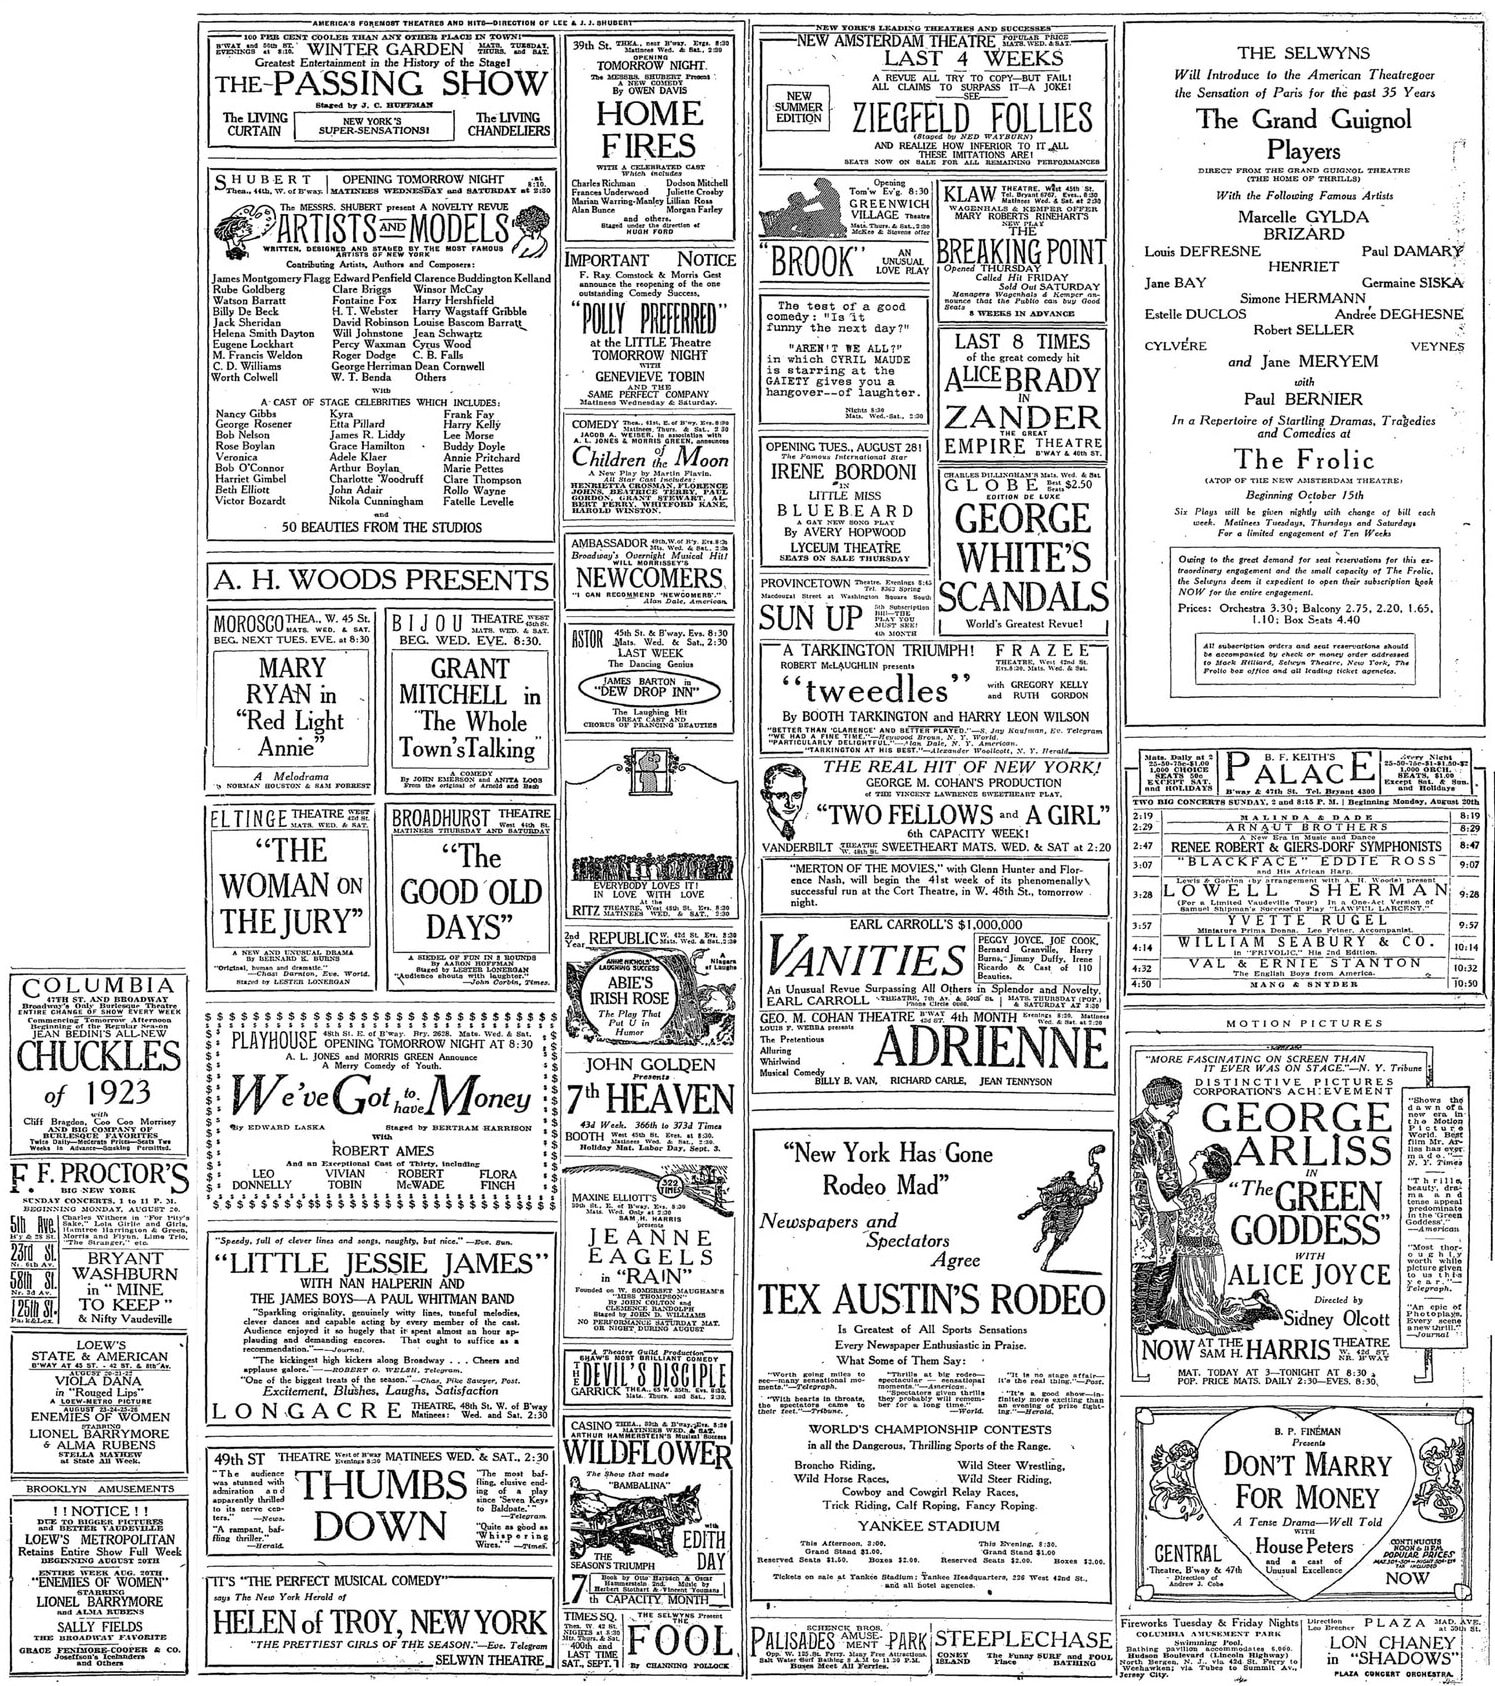 CHAPTER-18-New-York-Times-August-19-1923-Artists-and-Models-ad-opt.jpg